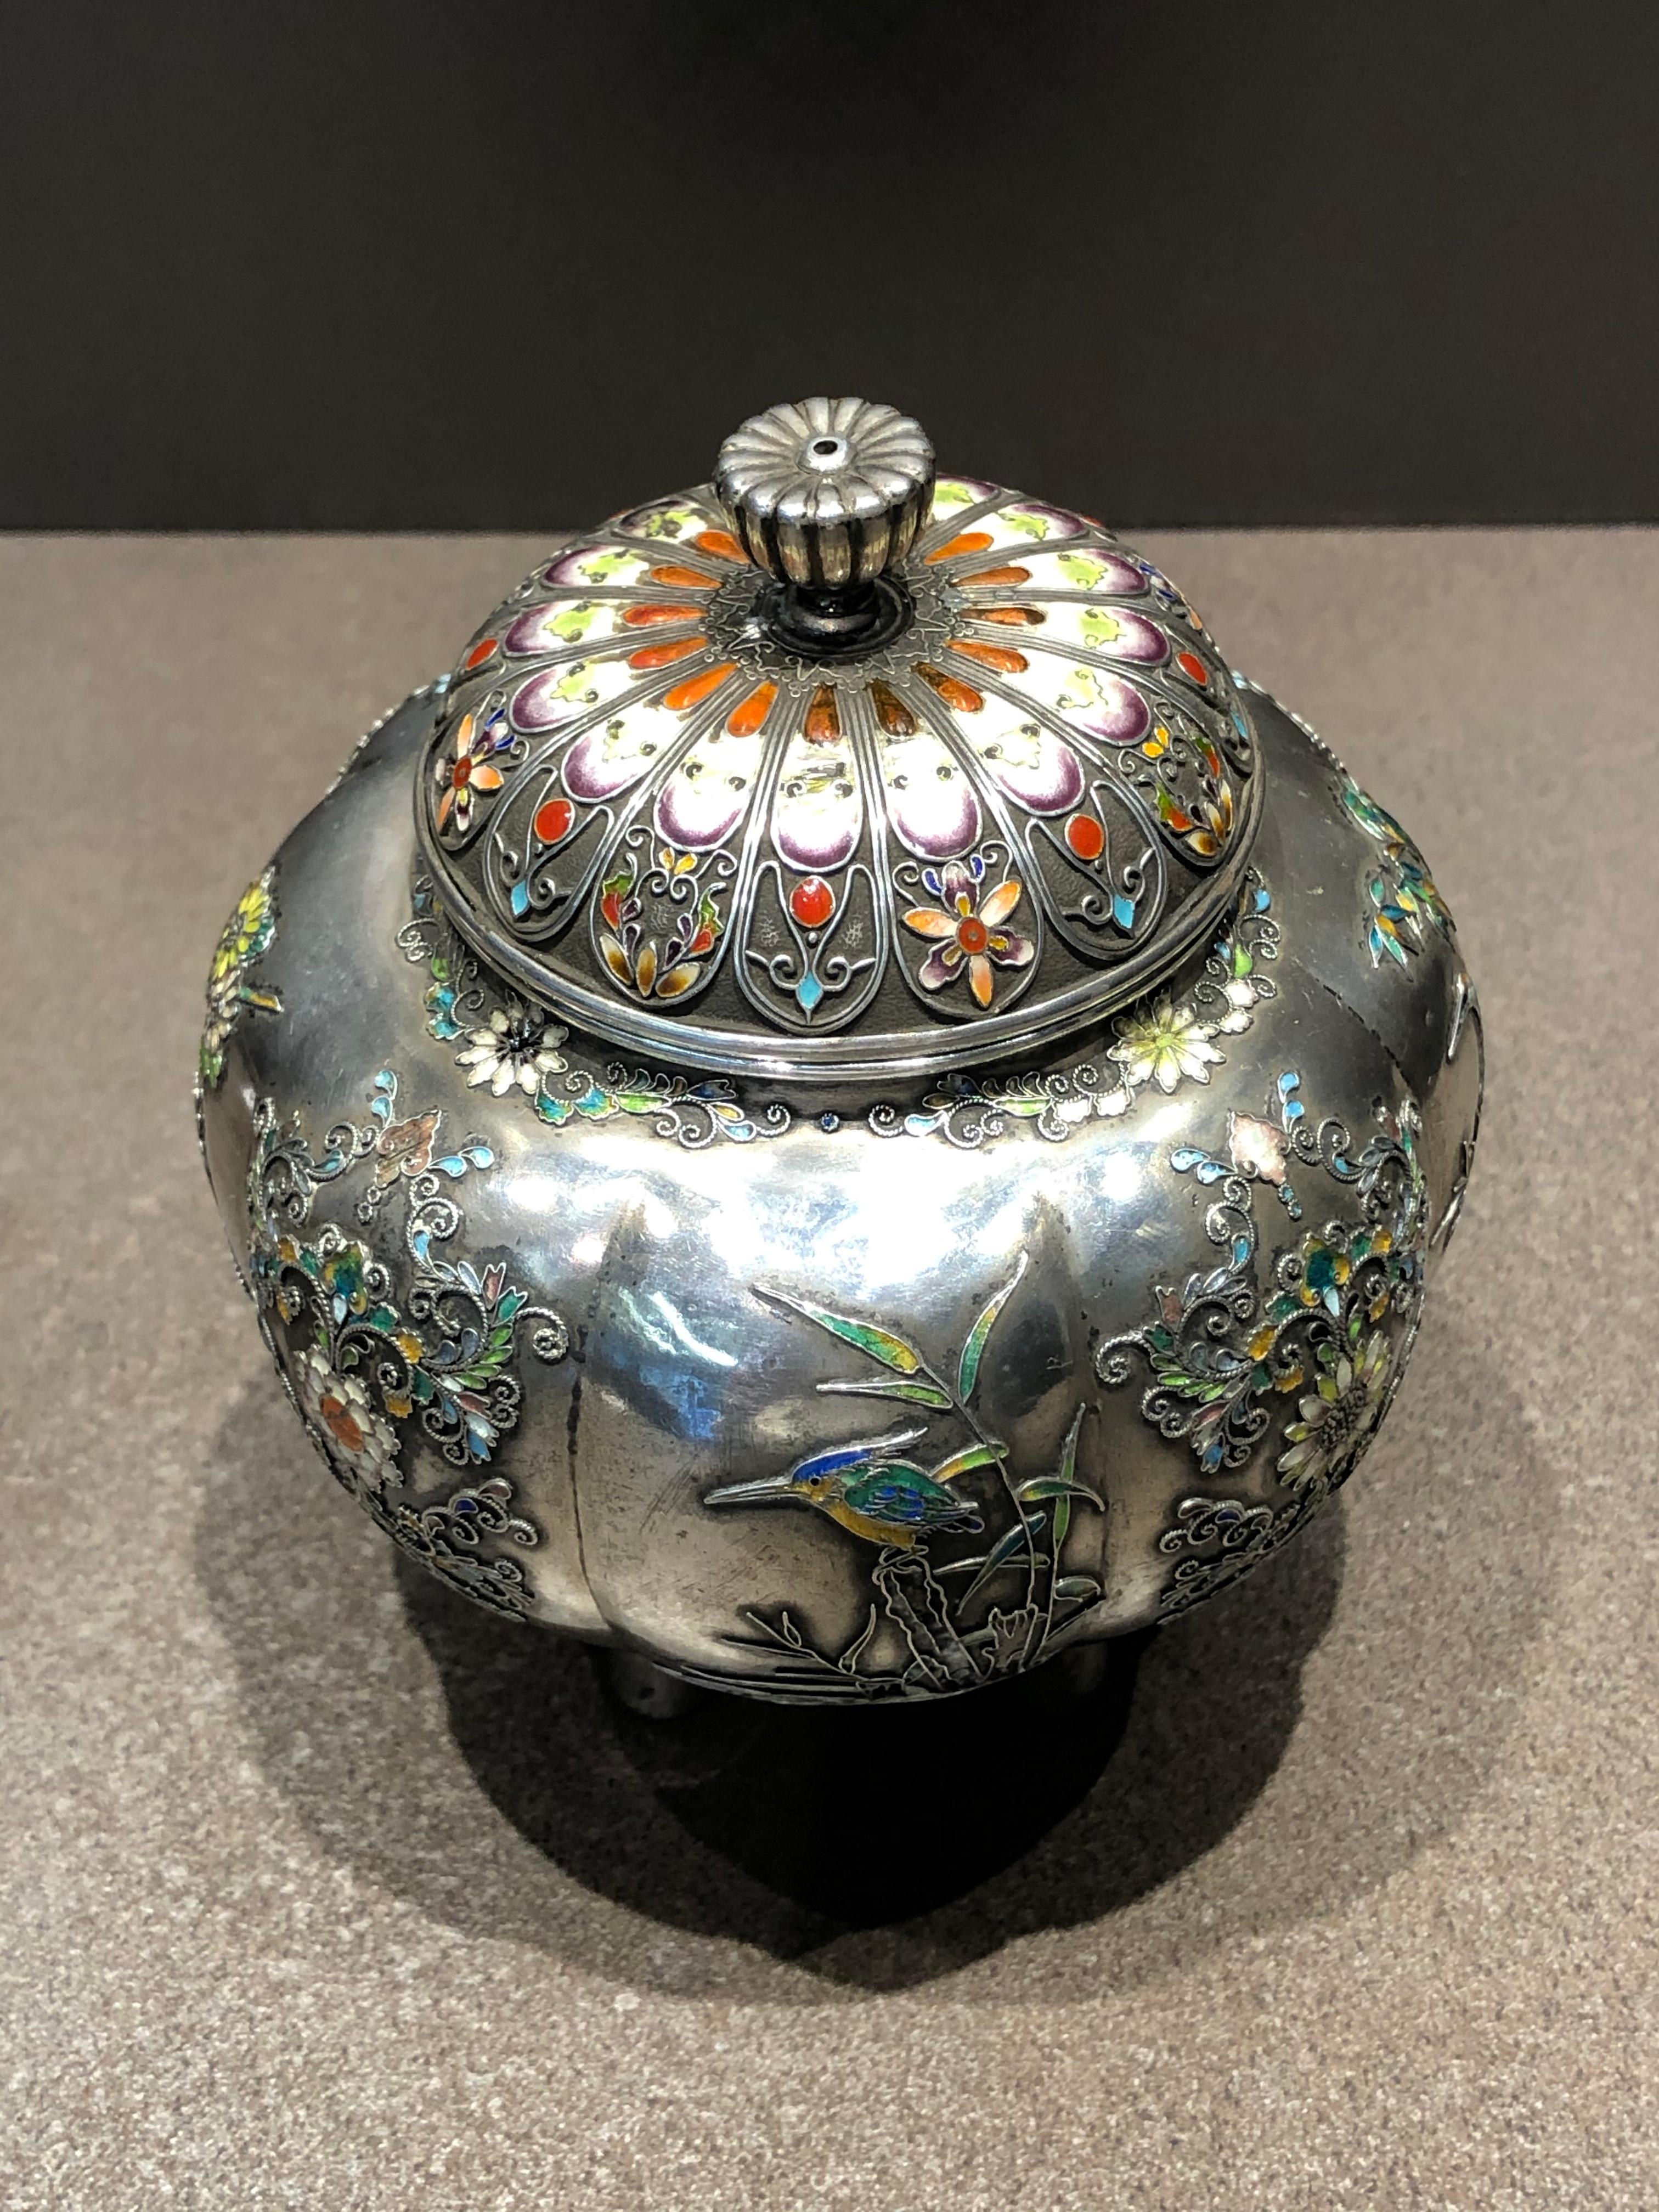 Four Seasons Flower and Birds Enamel Designed Silver Incense Burner, 19C In Good Condition For Sale In Chuo-ku, Tokyo